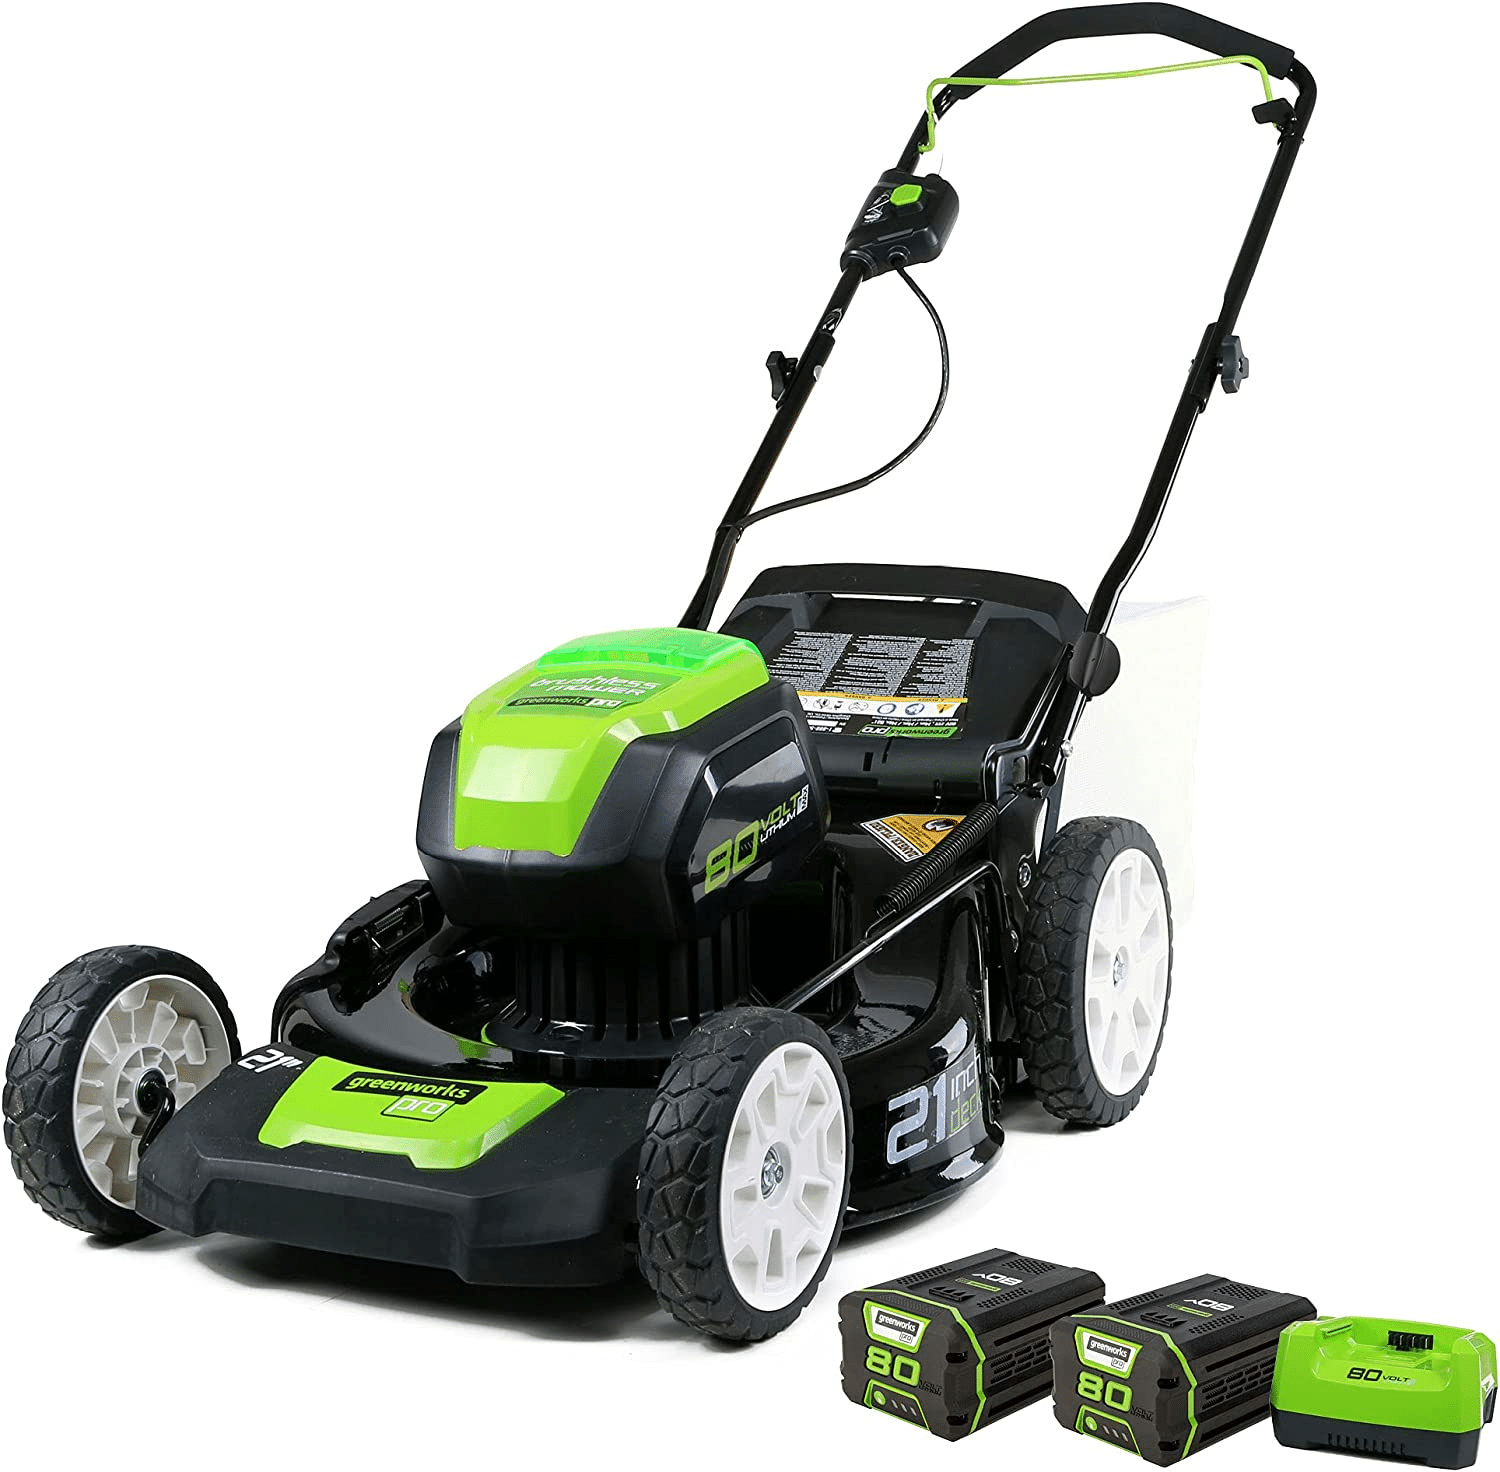 A powerful electric lawn mower designed specifically for hilly terrain, the best lawn mower for hills